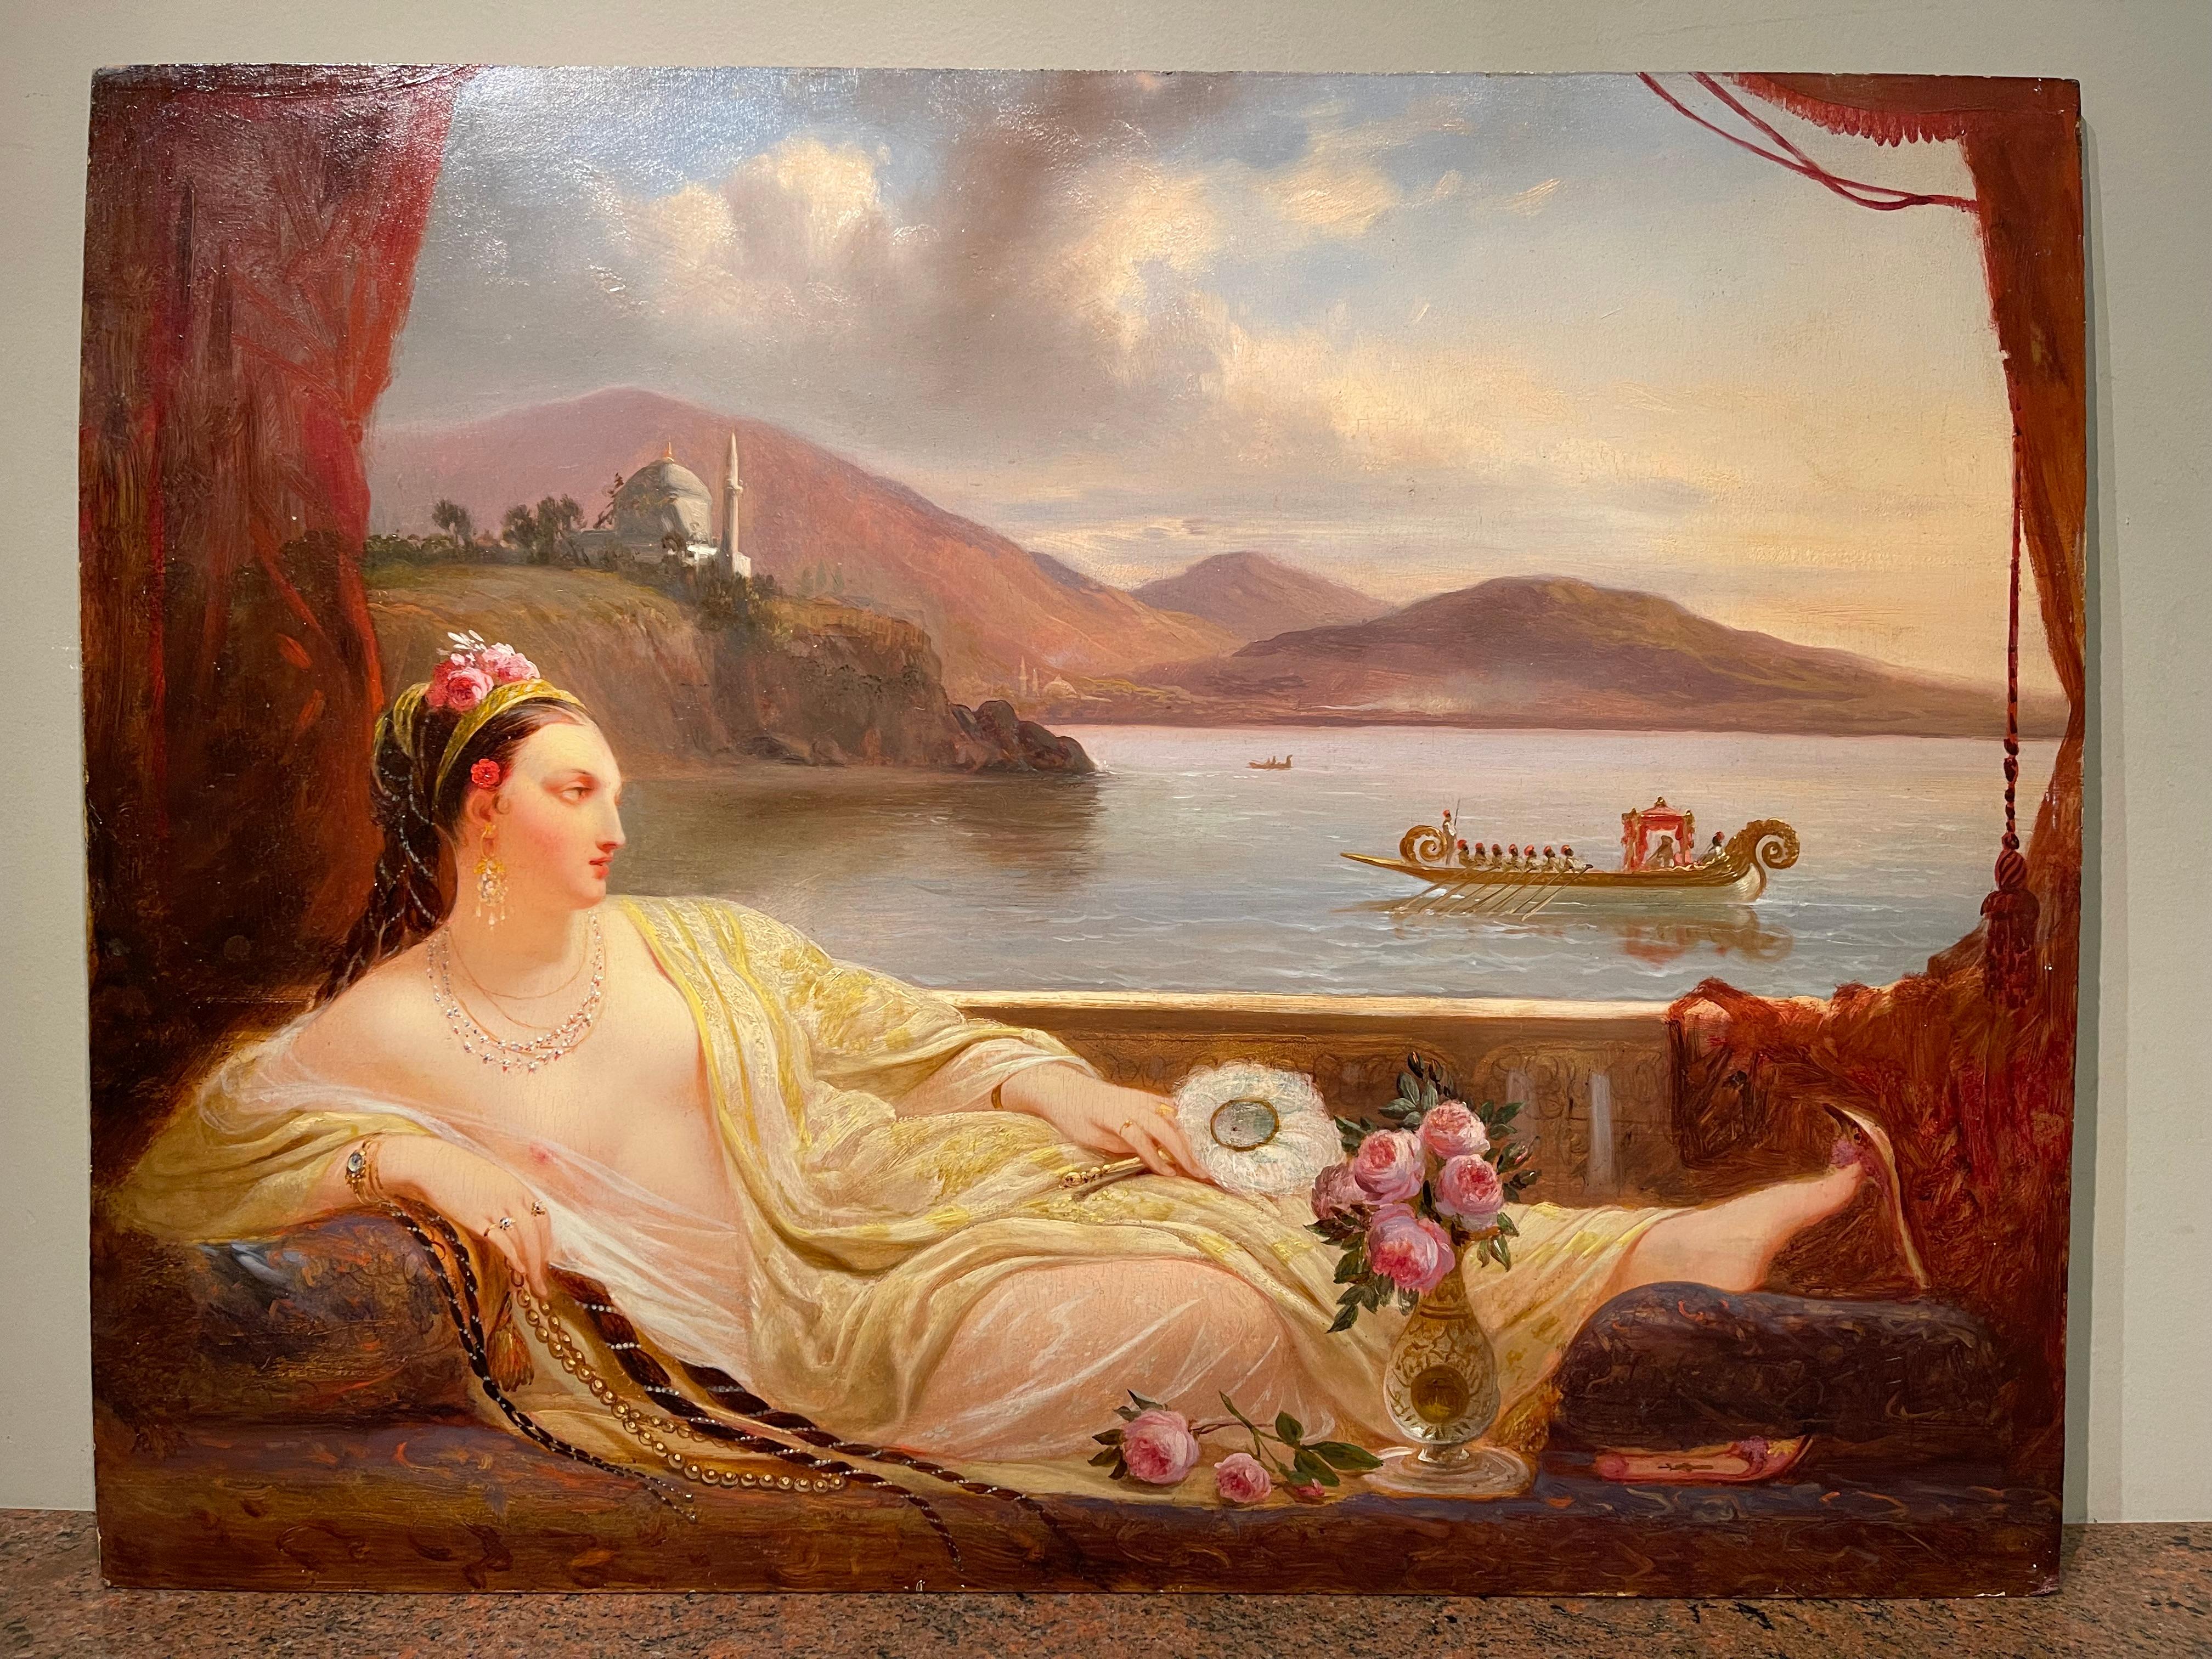 Oil on panel portraying a languid young woman, perhaps a favorite or the wife of the Sultan, admiring what is thought to be the Bosphorus. 
A rich boat with several oarsmen is approaching, and she appears to be observing them.
In the distance, two